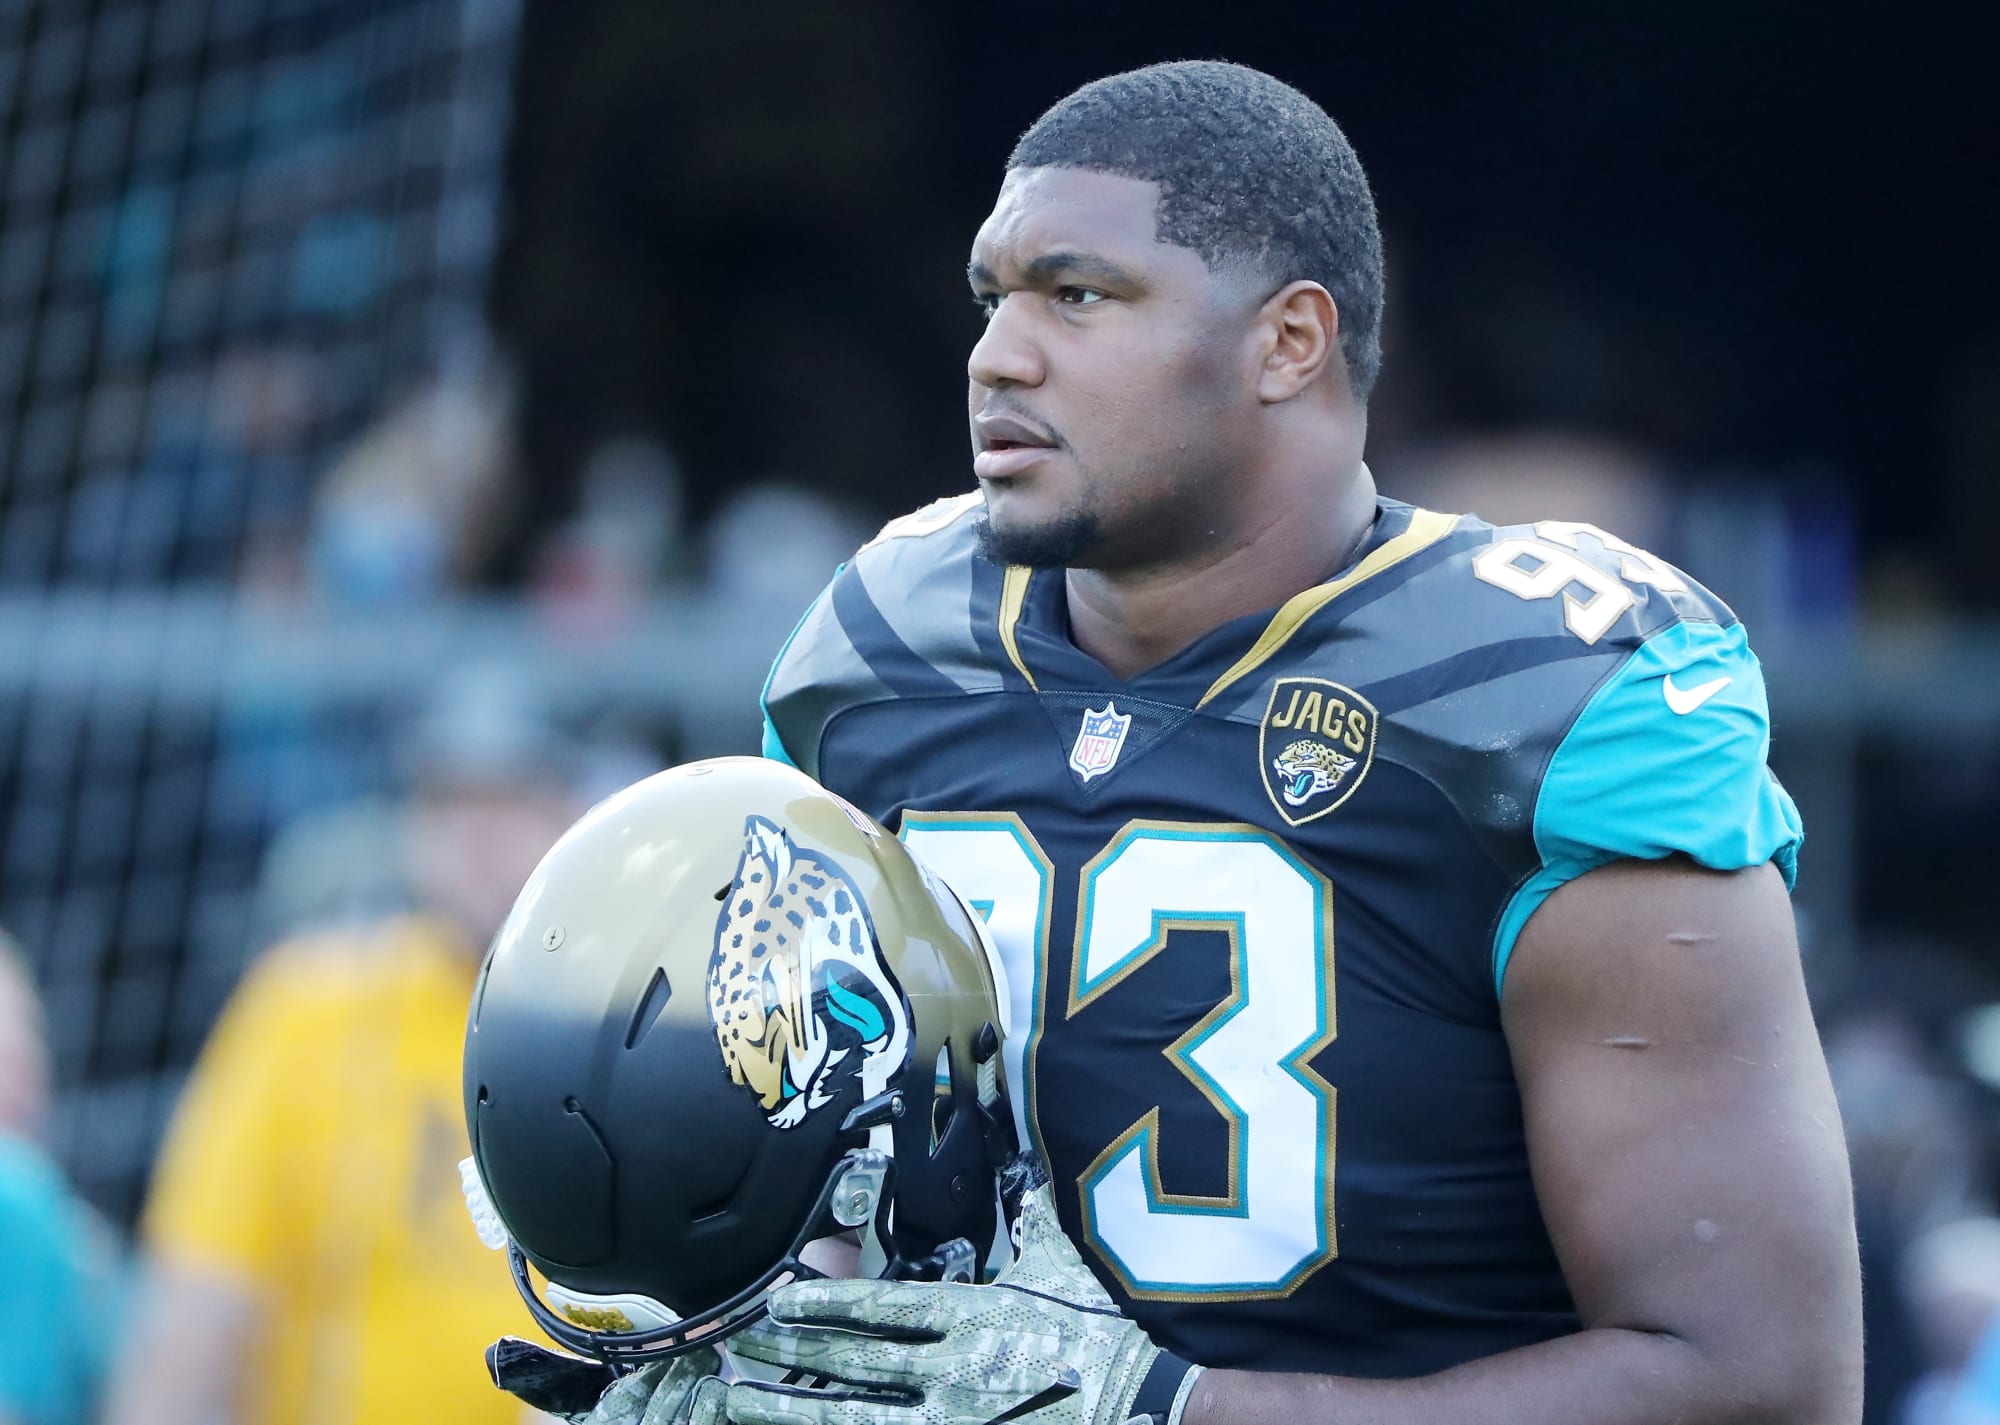 Jaguars' free agent signings have helped shape the 2017 playoff race